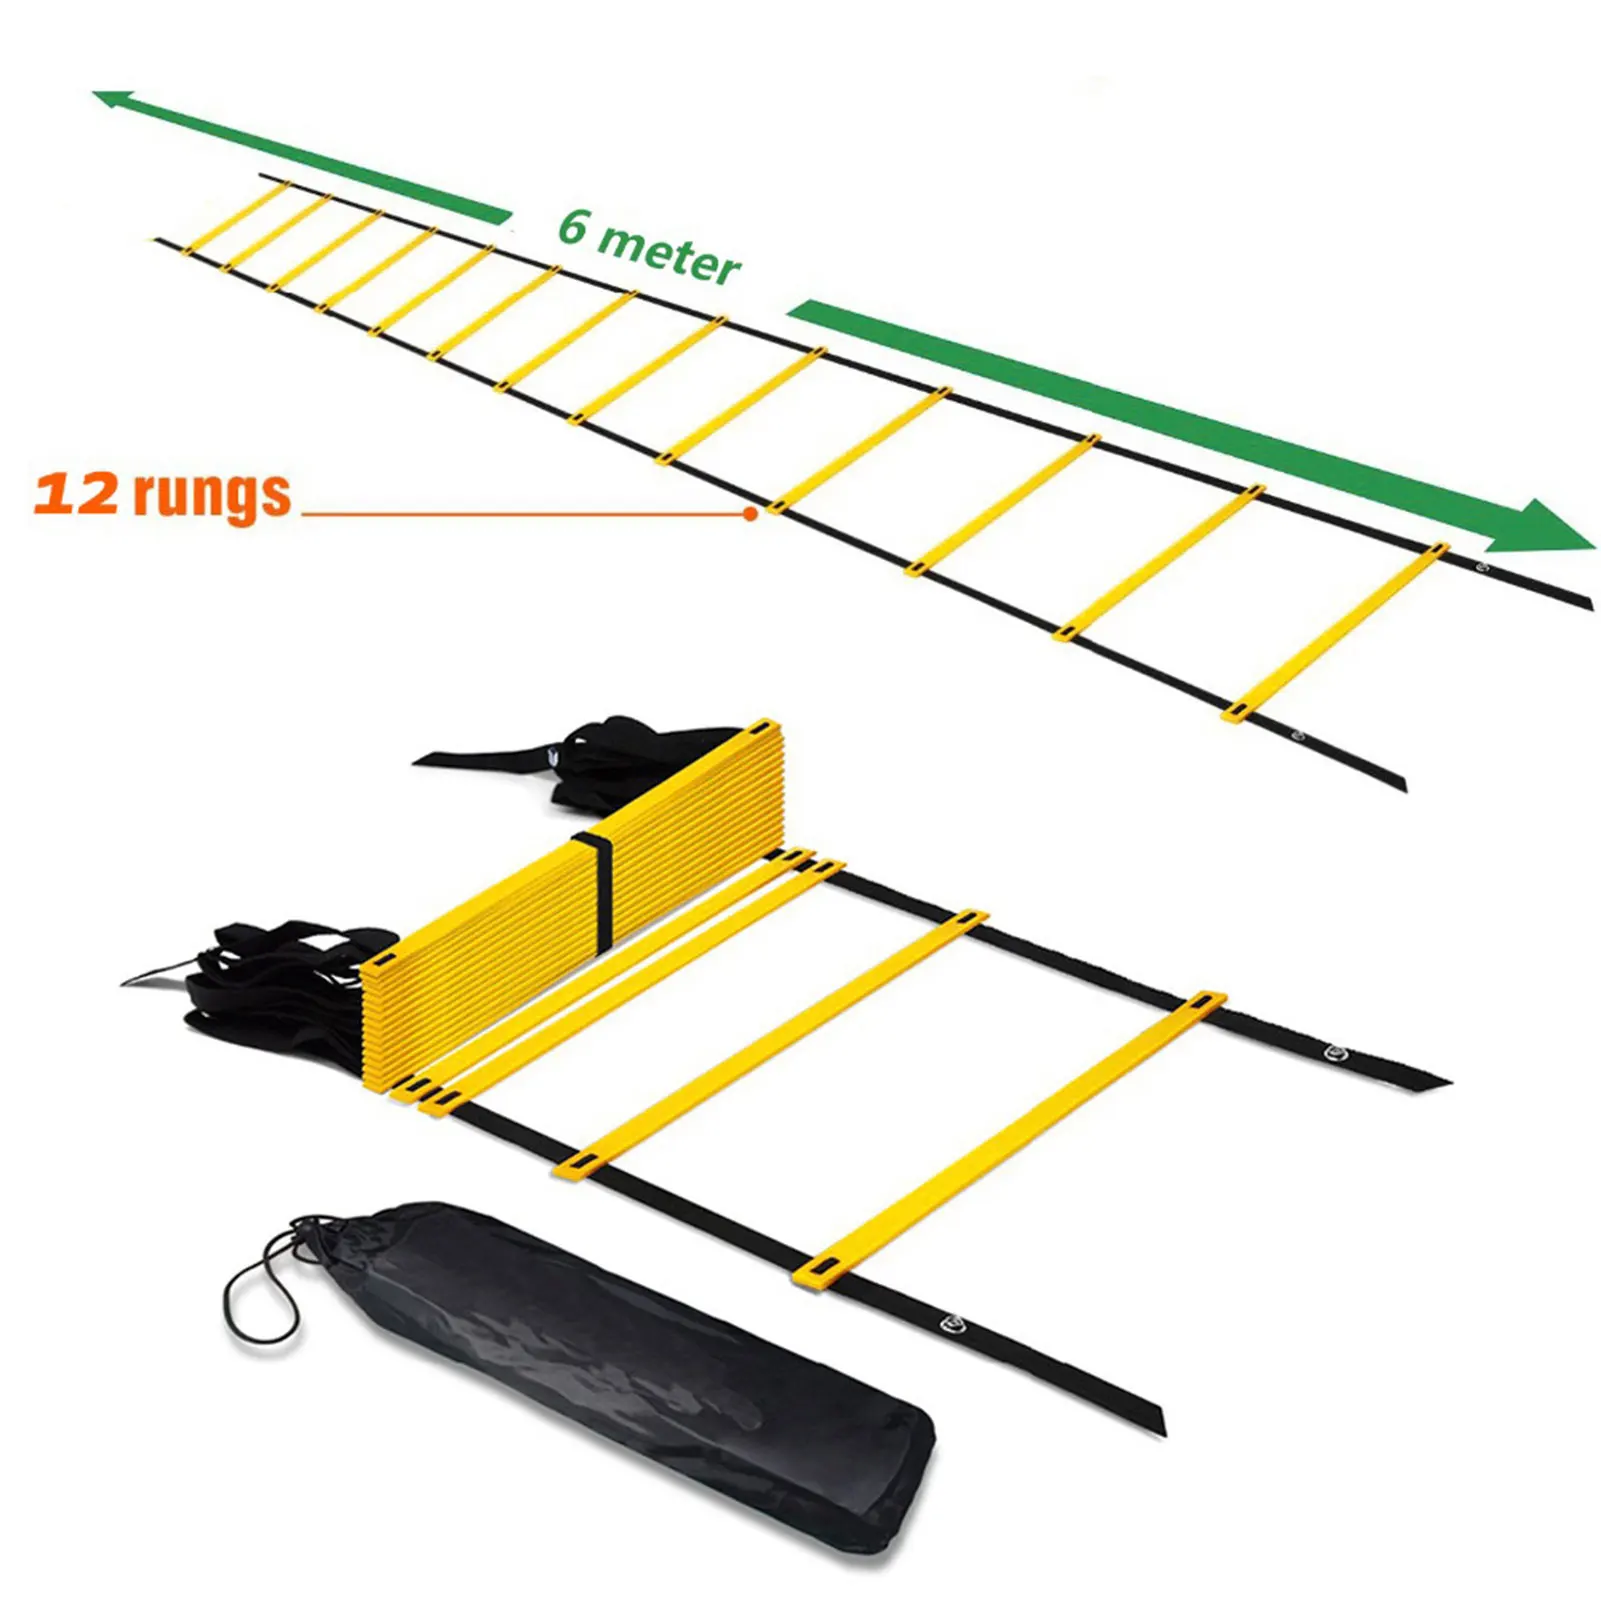 Speed Jump Rope and Footwork Drills Equipment Speed&Agility Ladder Training Set 5 Speed Training Hurdle，20 ft/12 Rung Agility Ladder 5 Latex-Free Resistance Bands 10 Cones Carry Bag 